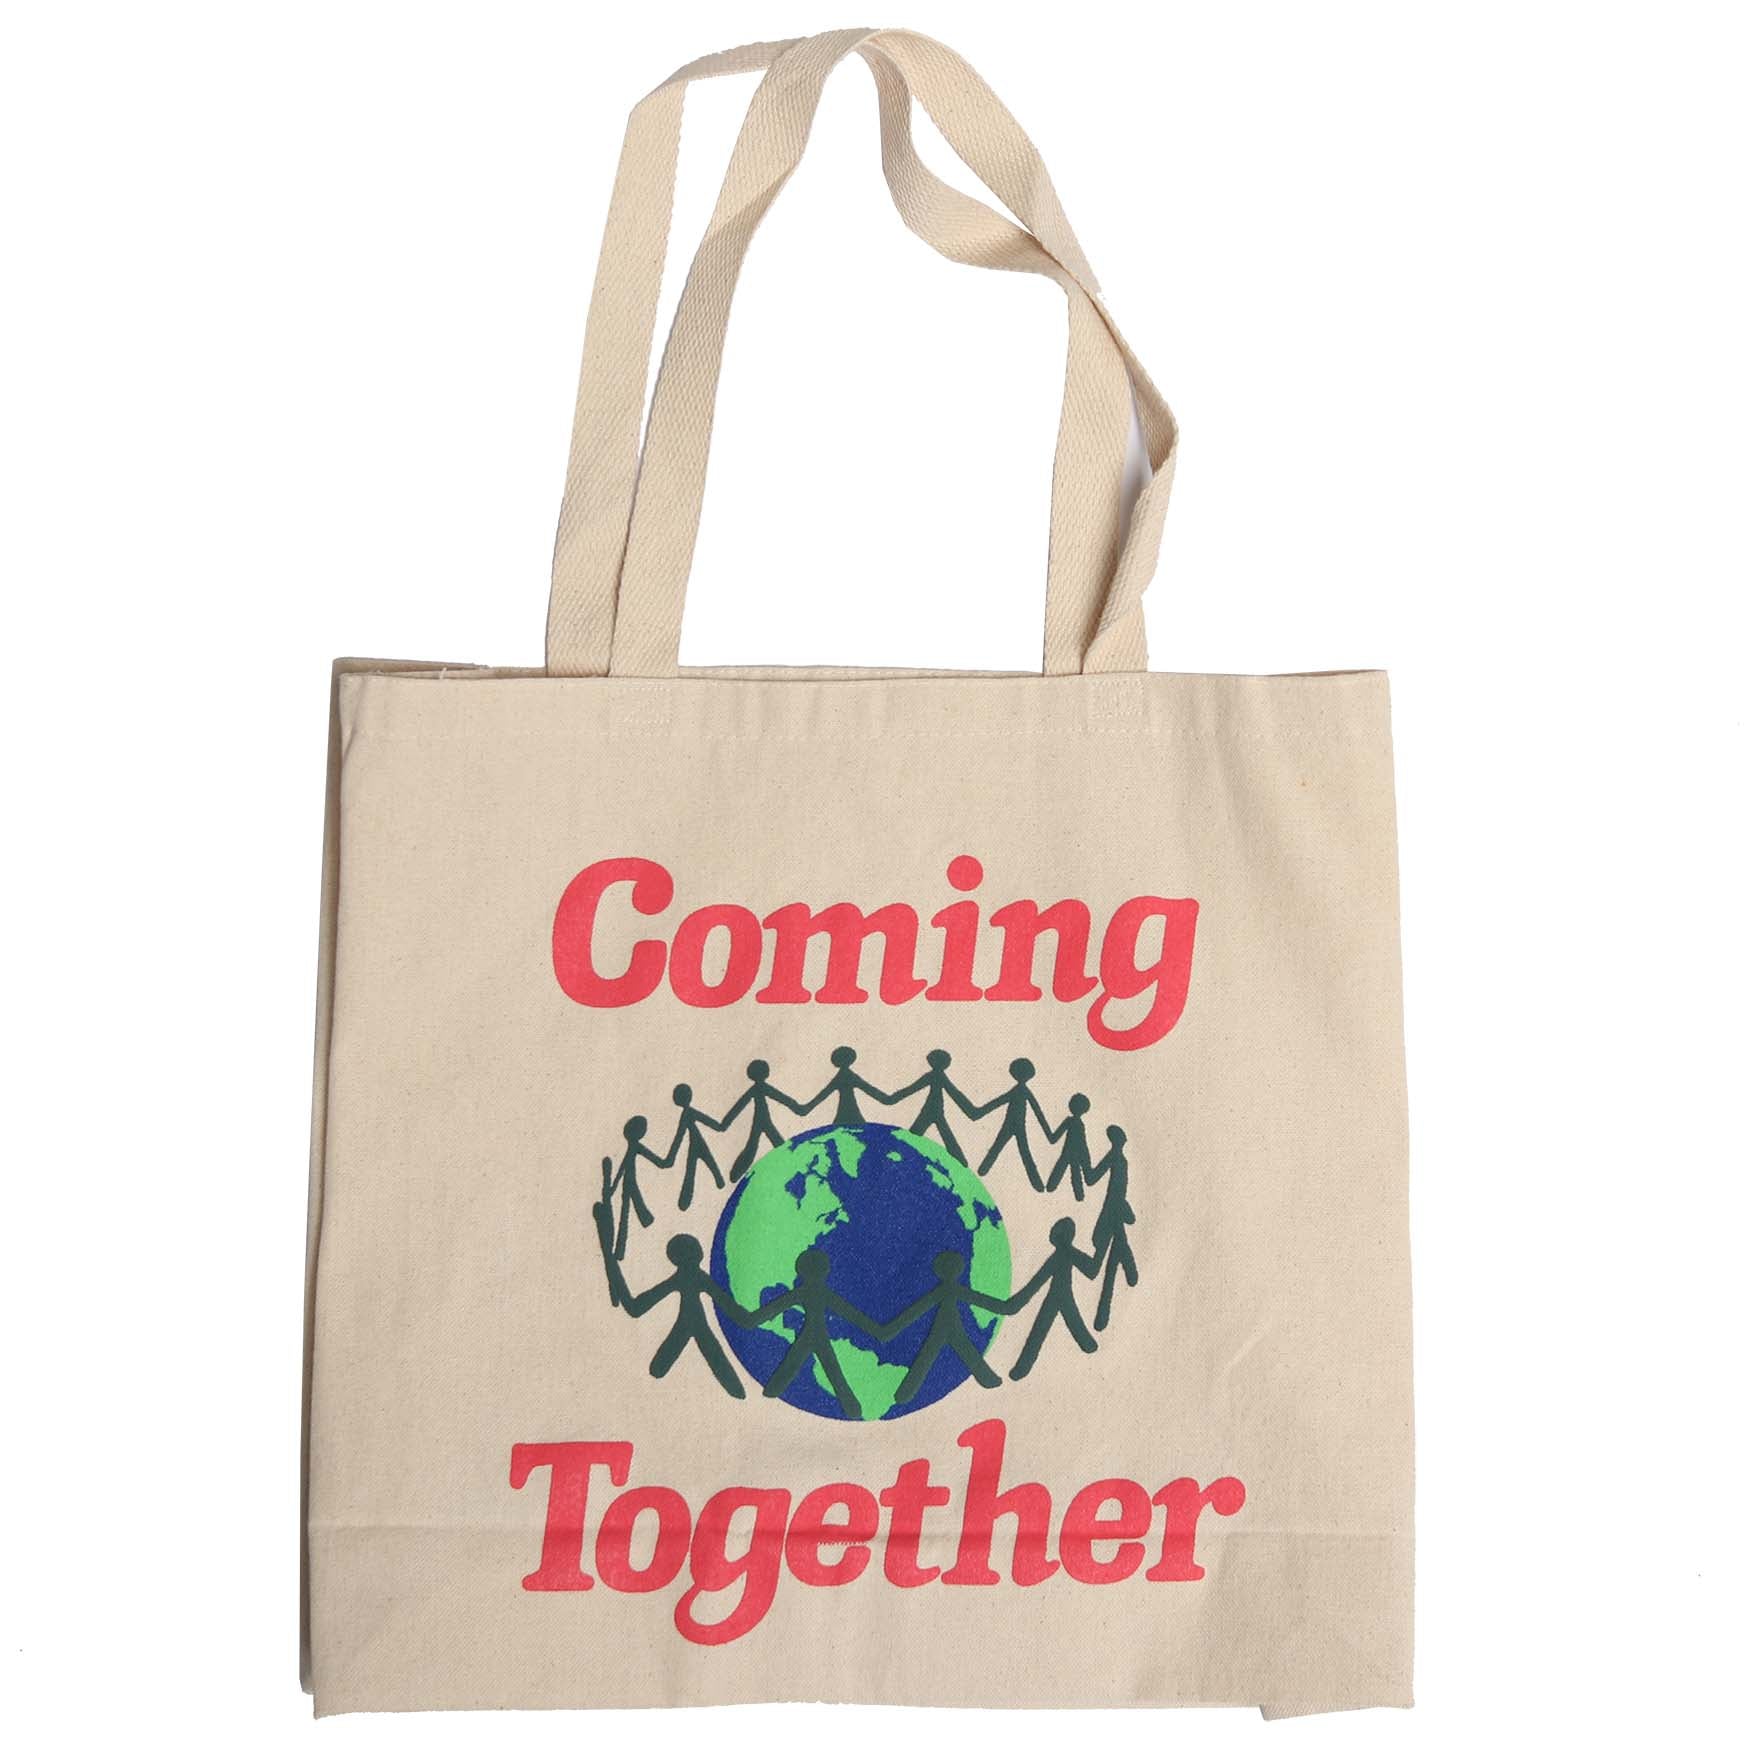 Coming Together Tote Bag